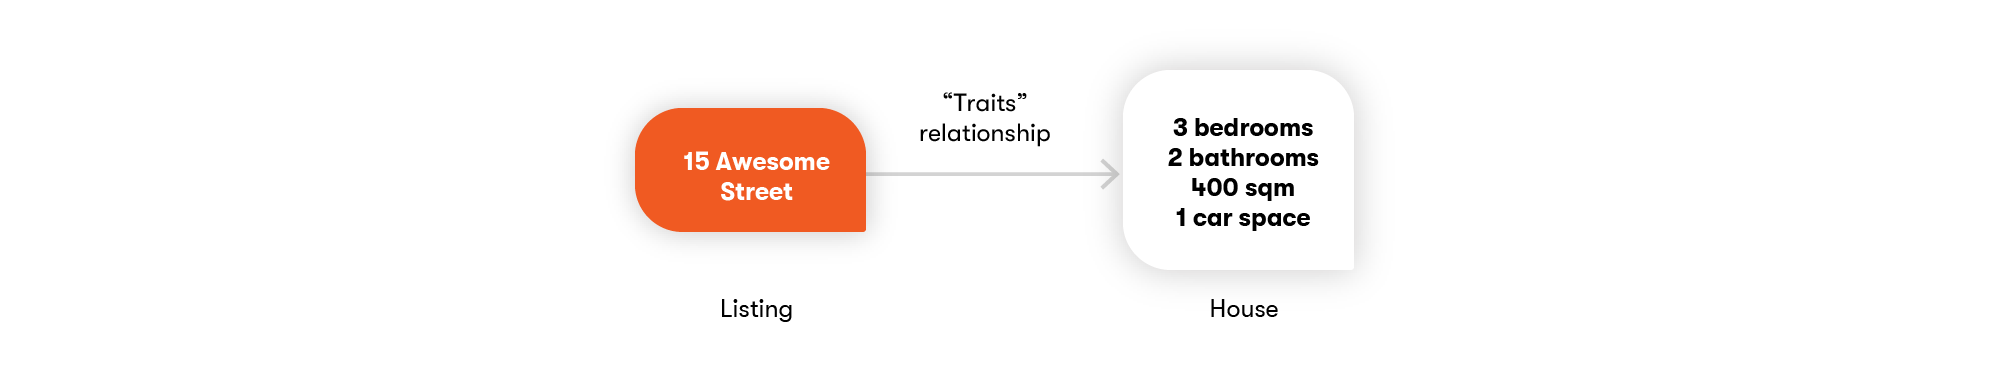 The “Traits” relationship